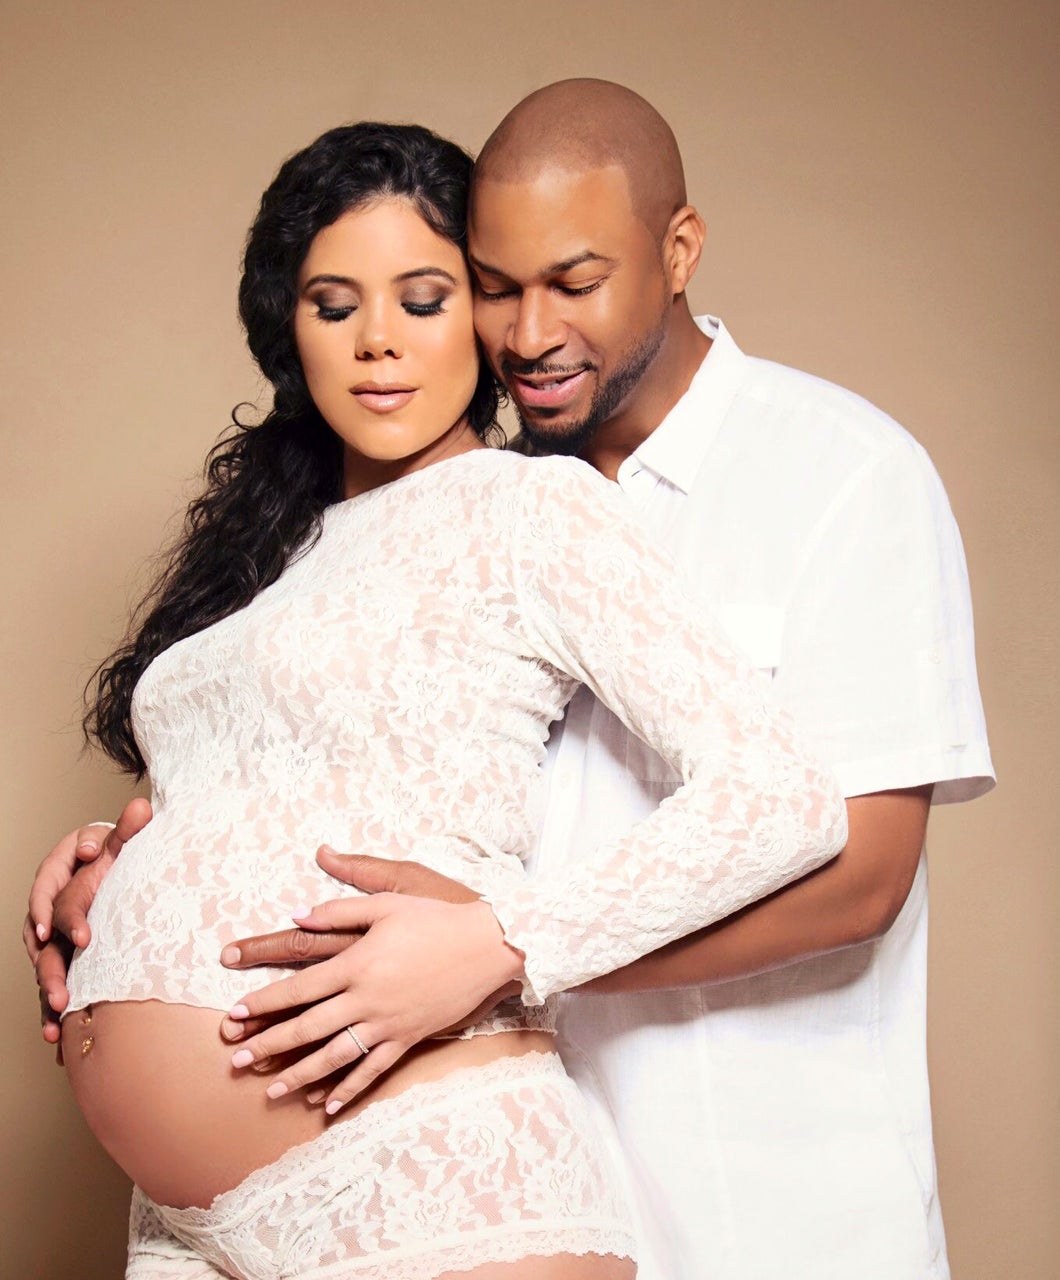 PHOTOS: Finesse Mitchell and Wife's Pregnancy Photoshoot